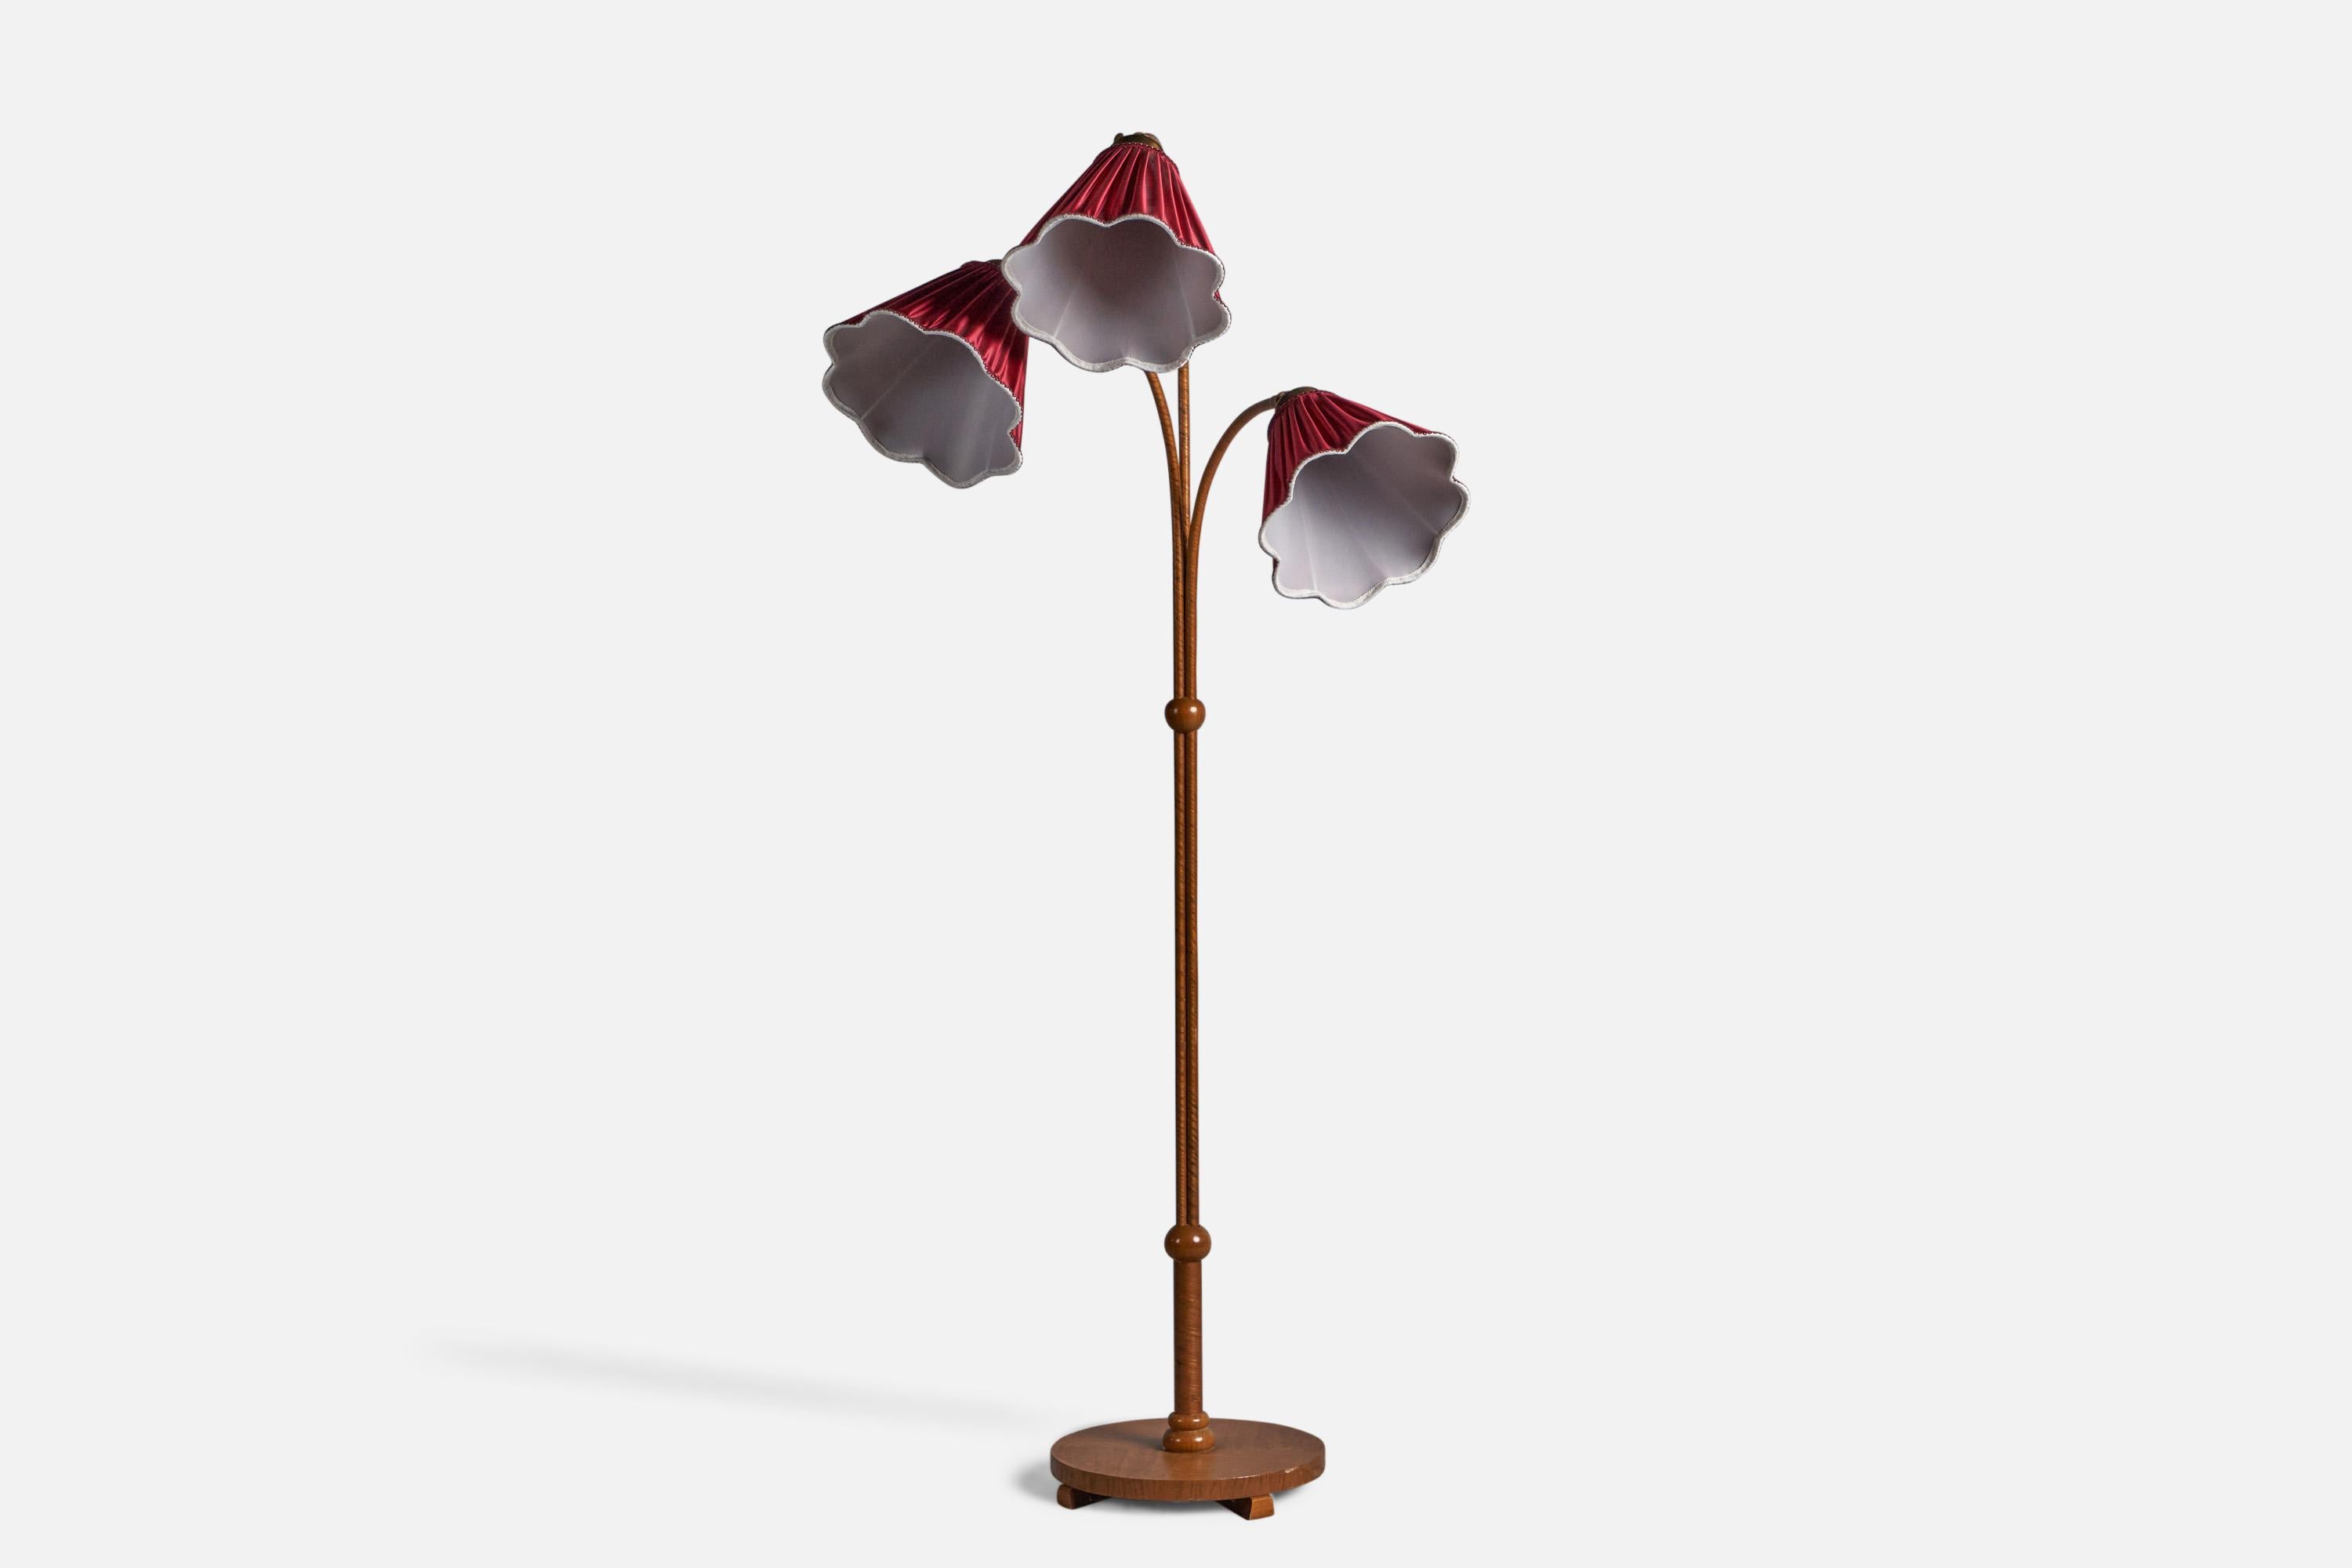 An oak, wrapped wood veneer, brass and red fabric floor lamp, designed and produced in Sweden, c. 1940s.

Overall Dimensions (inches): 63.75